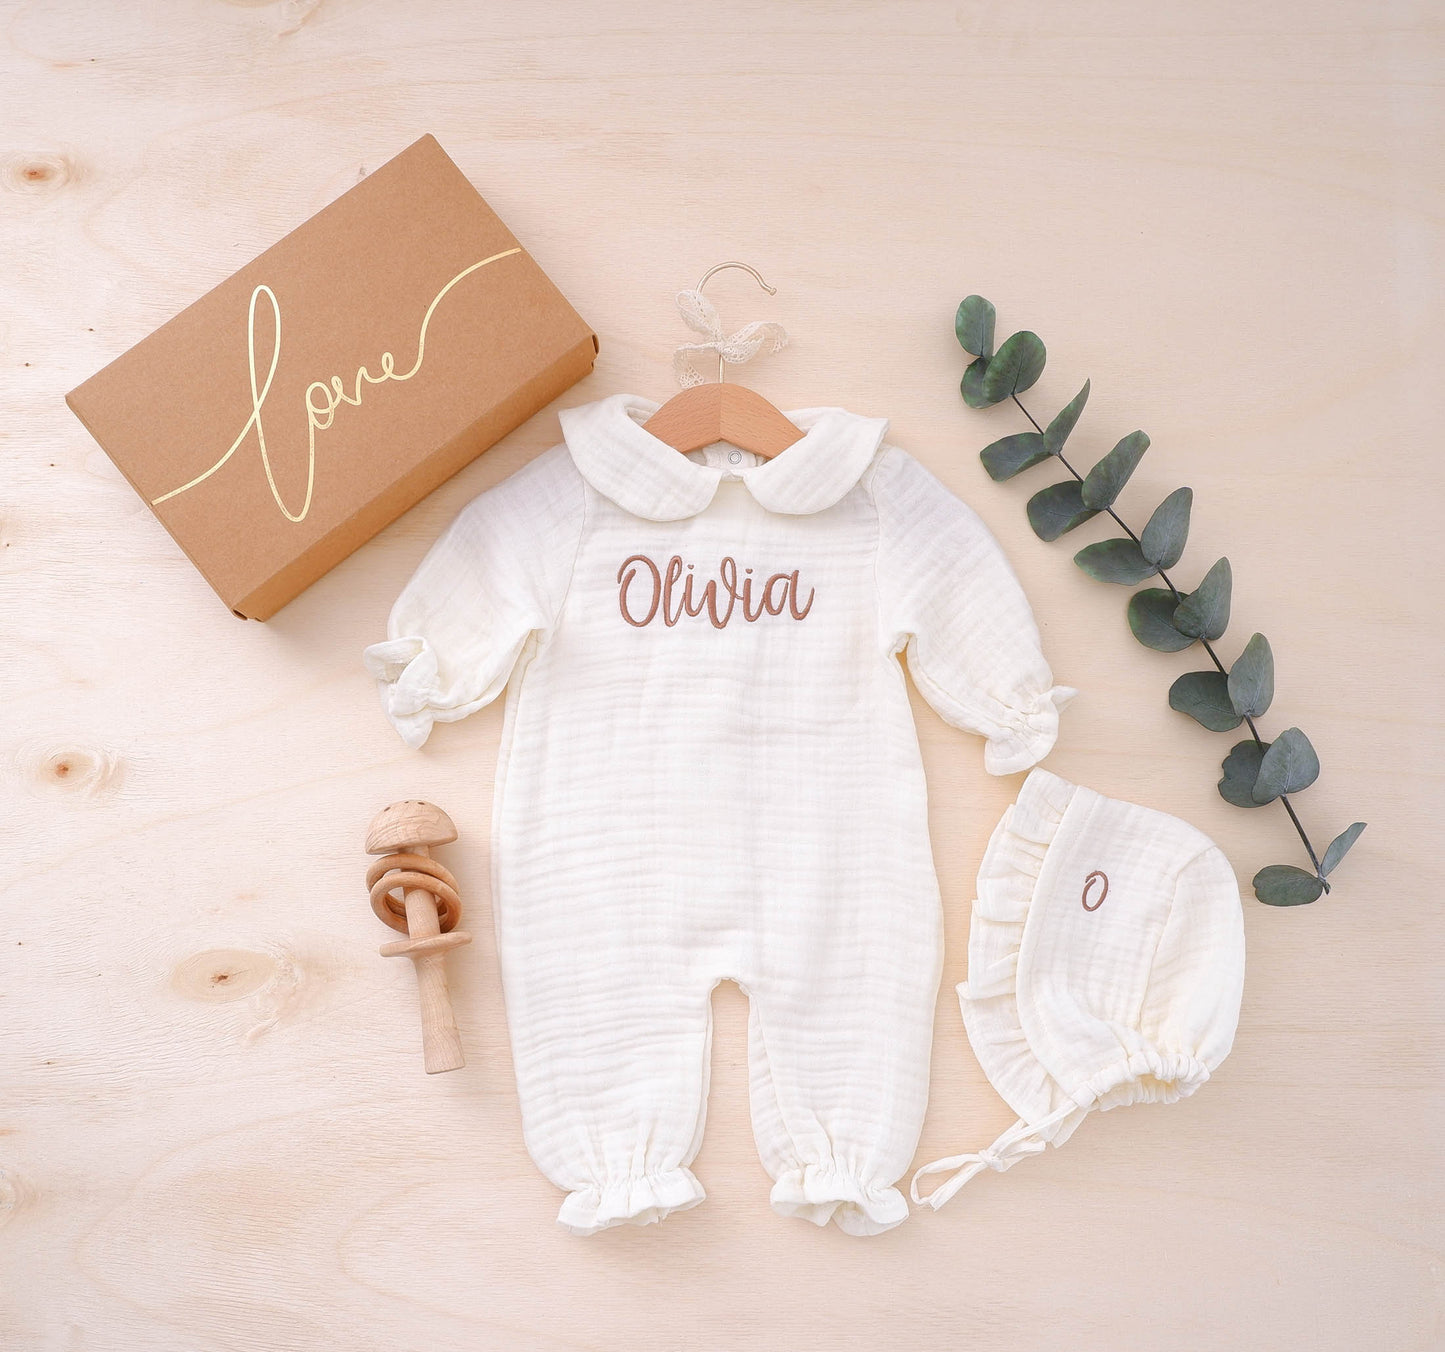 Personalized coming home outfit,Newborn girl coming home outfit, Customized baby girl hospital outfit, Baby girl coming home outfit